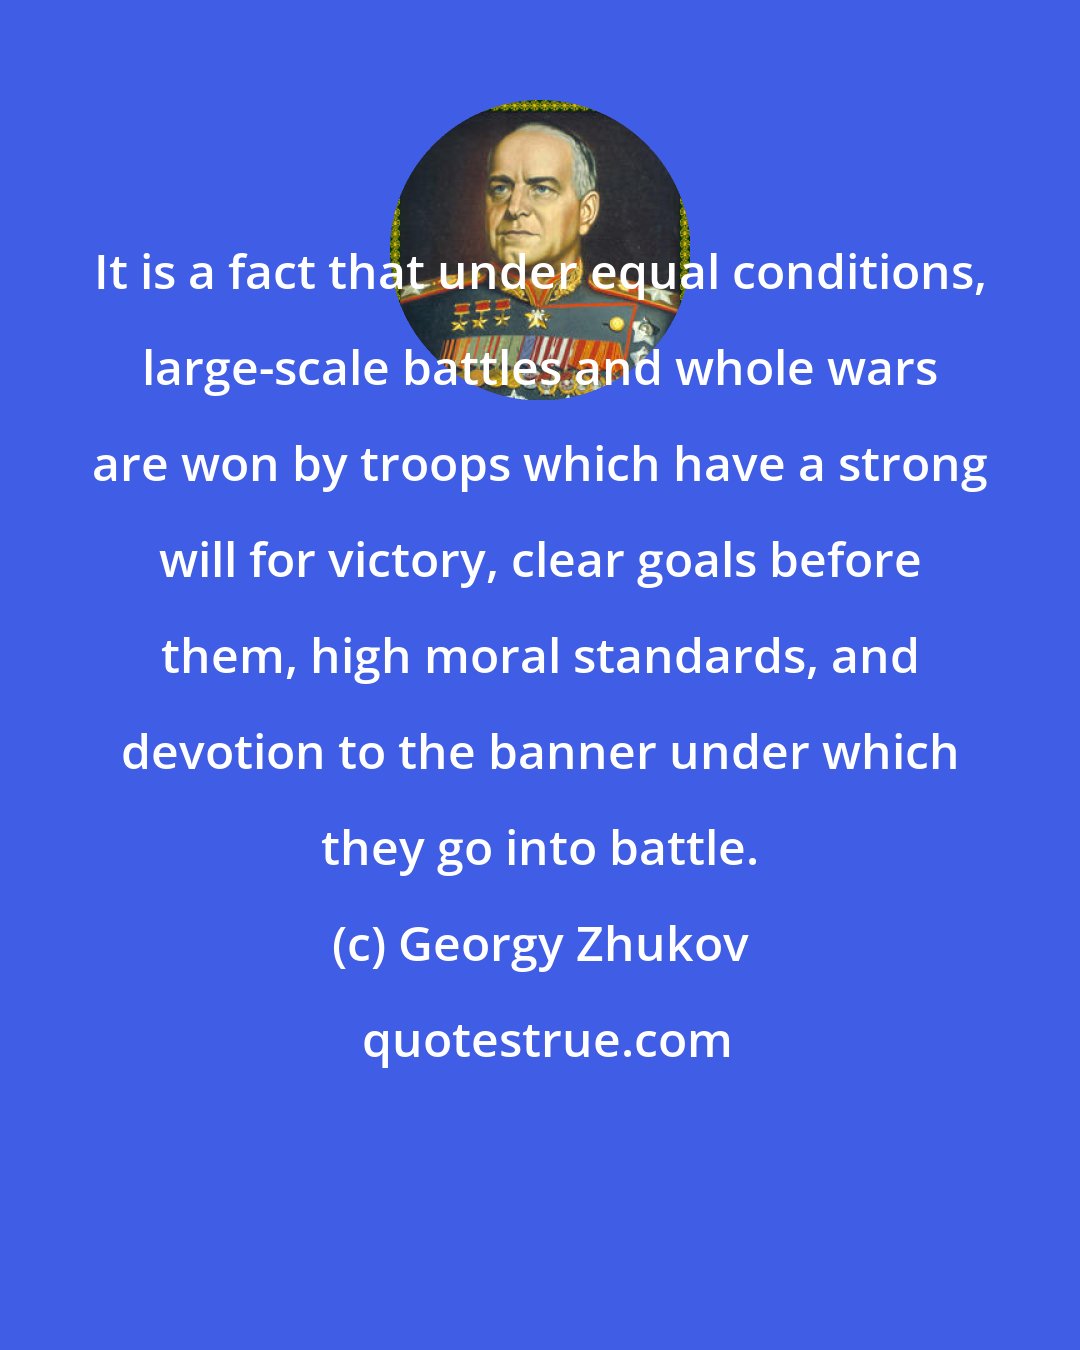 Georgy Zhukov: It is a fact that under equal conditions, large-scale battles and whole wars are won by troops which have a strong will for victory, clear goals before them, high moral standards, and devotion to the banner under which they go into battle.